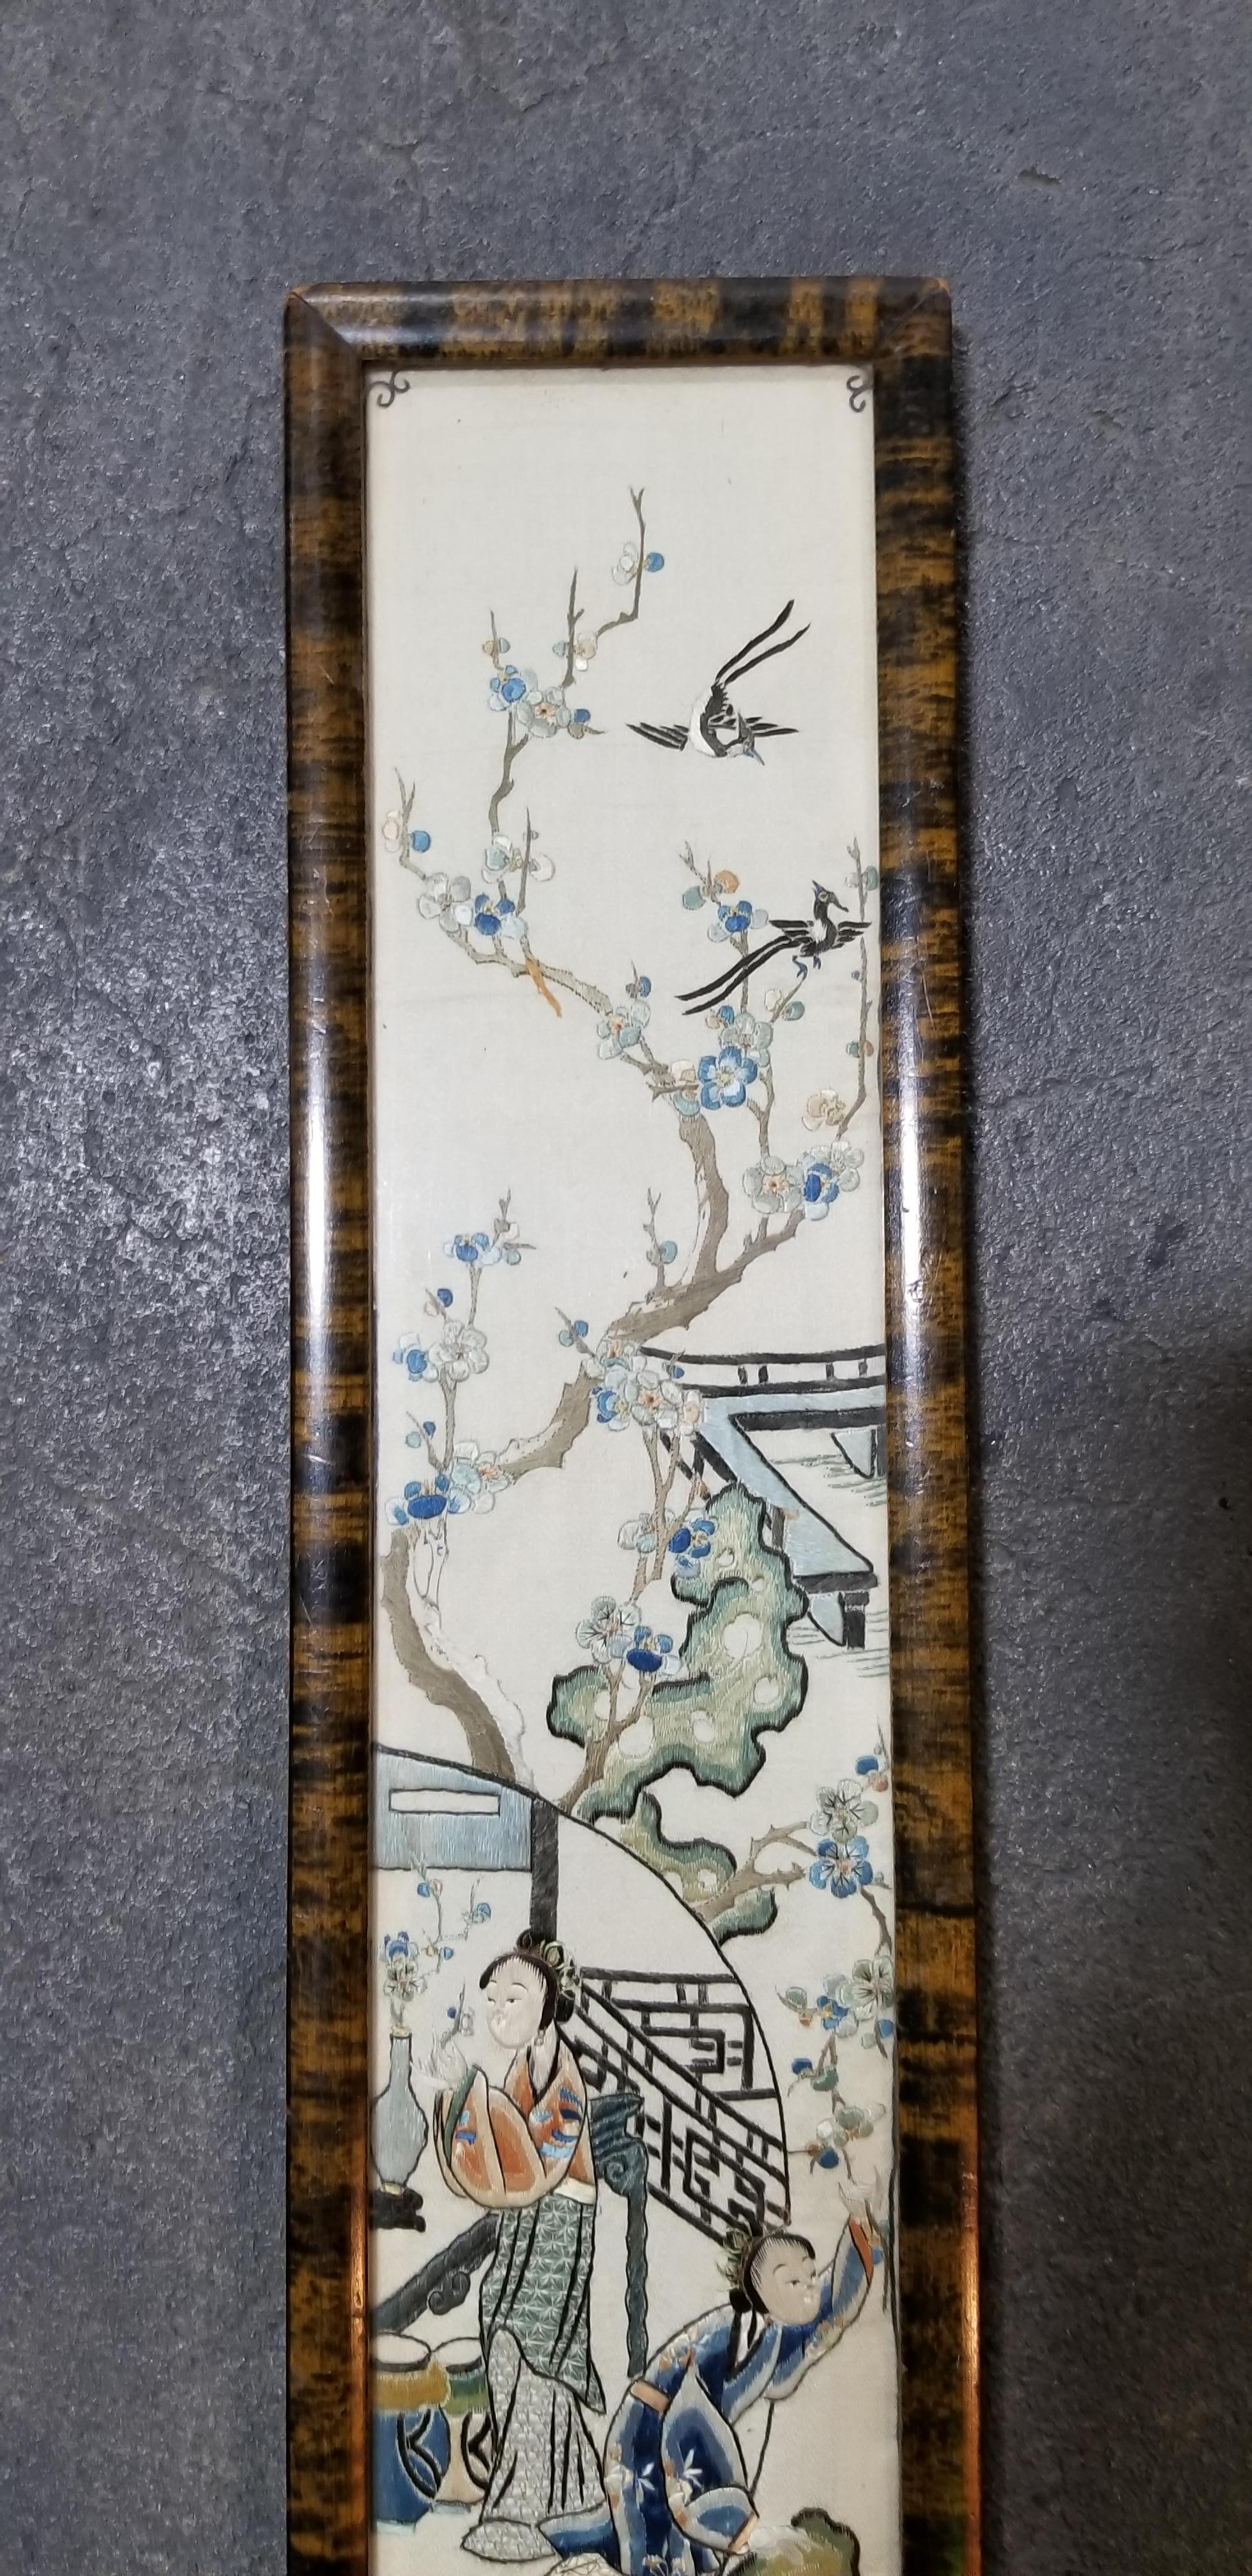 A small, hand embroidered Chinese silk textile with figures, trees and birds. Vintage frame from Gumps, San Francisco.

Gumps:
S & G Gump was founded in 1861 as a mirror and frame shop by Solomon Gump and his brother, Gustav. It later sold